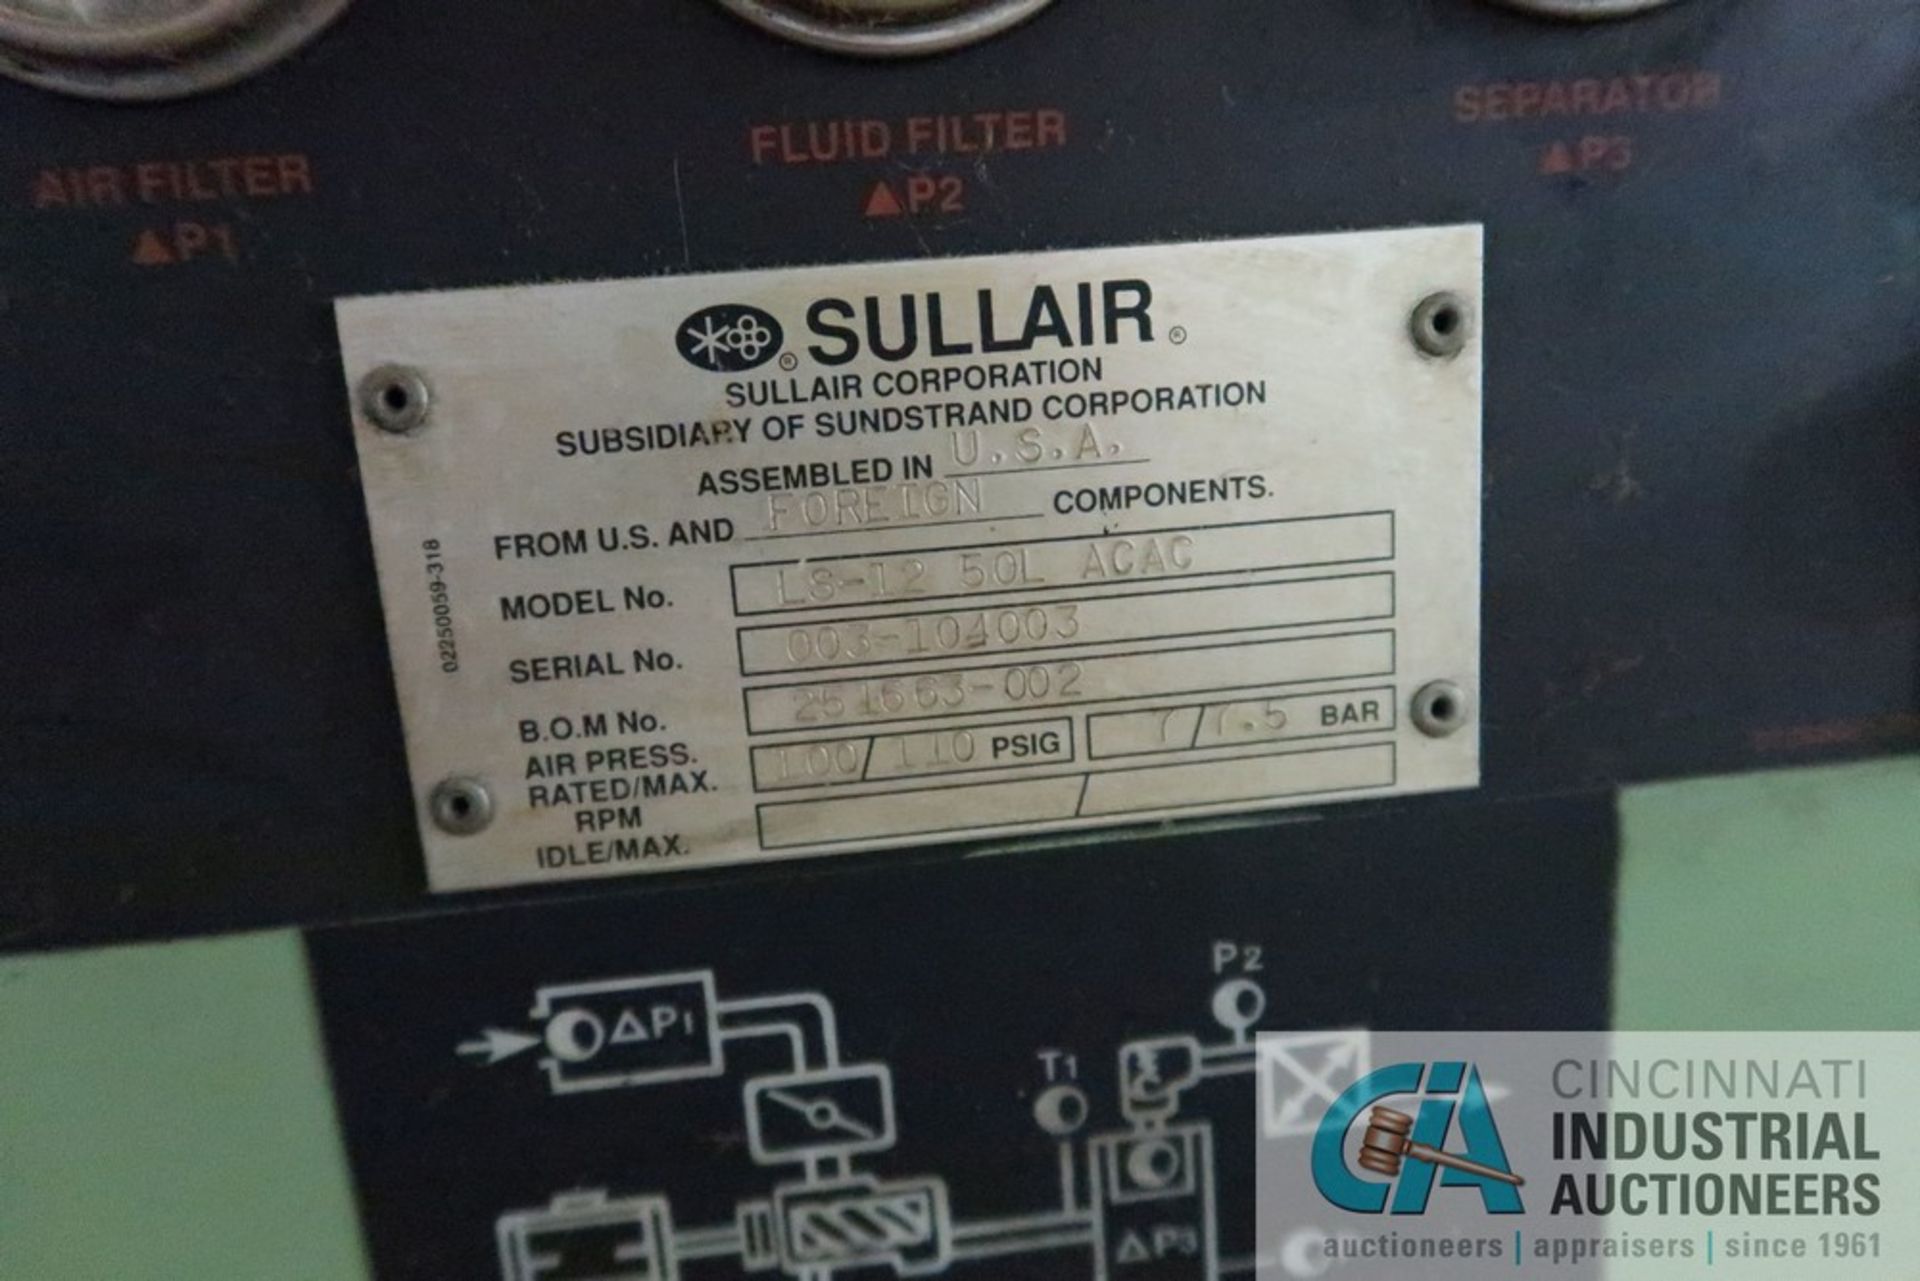 50 HP SULLAIR MODEL LS-12 50L ACAC SKID MOUNTED AIR COMPRESSOR; S/N 003-104003, 27,588 HOURS - Image 4 of 5